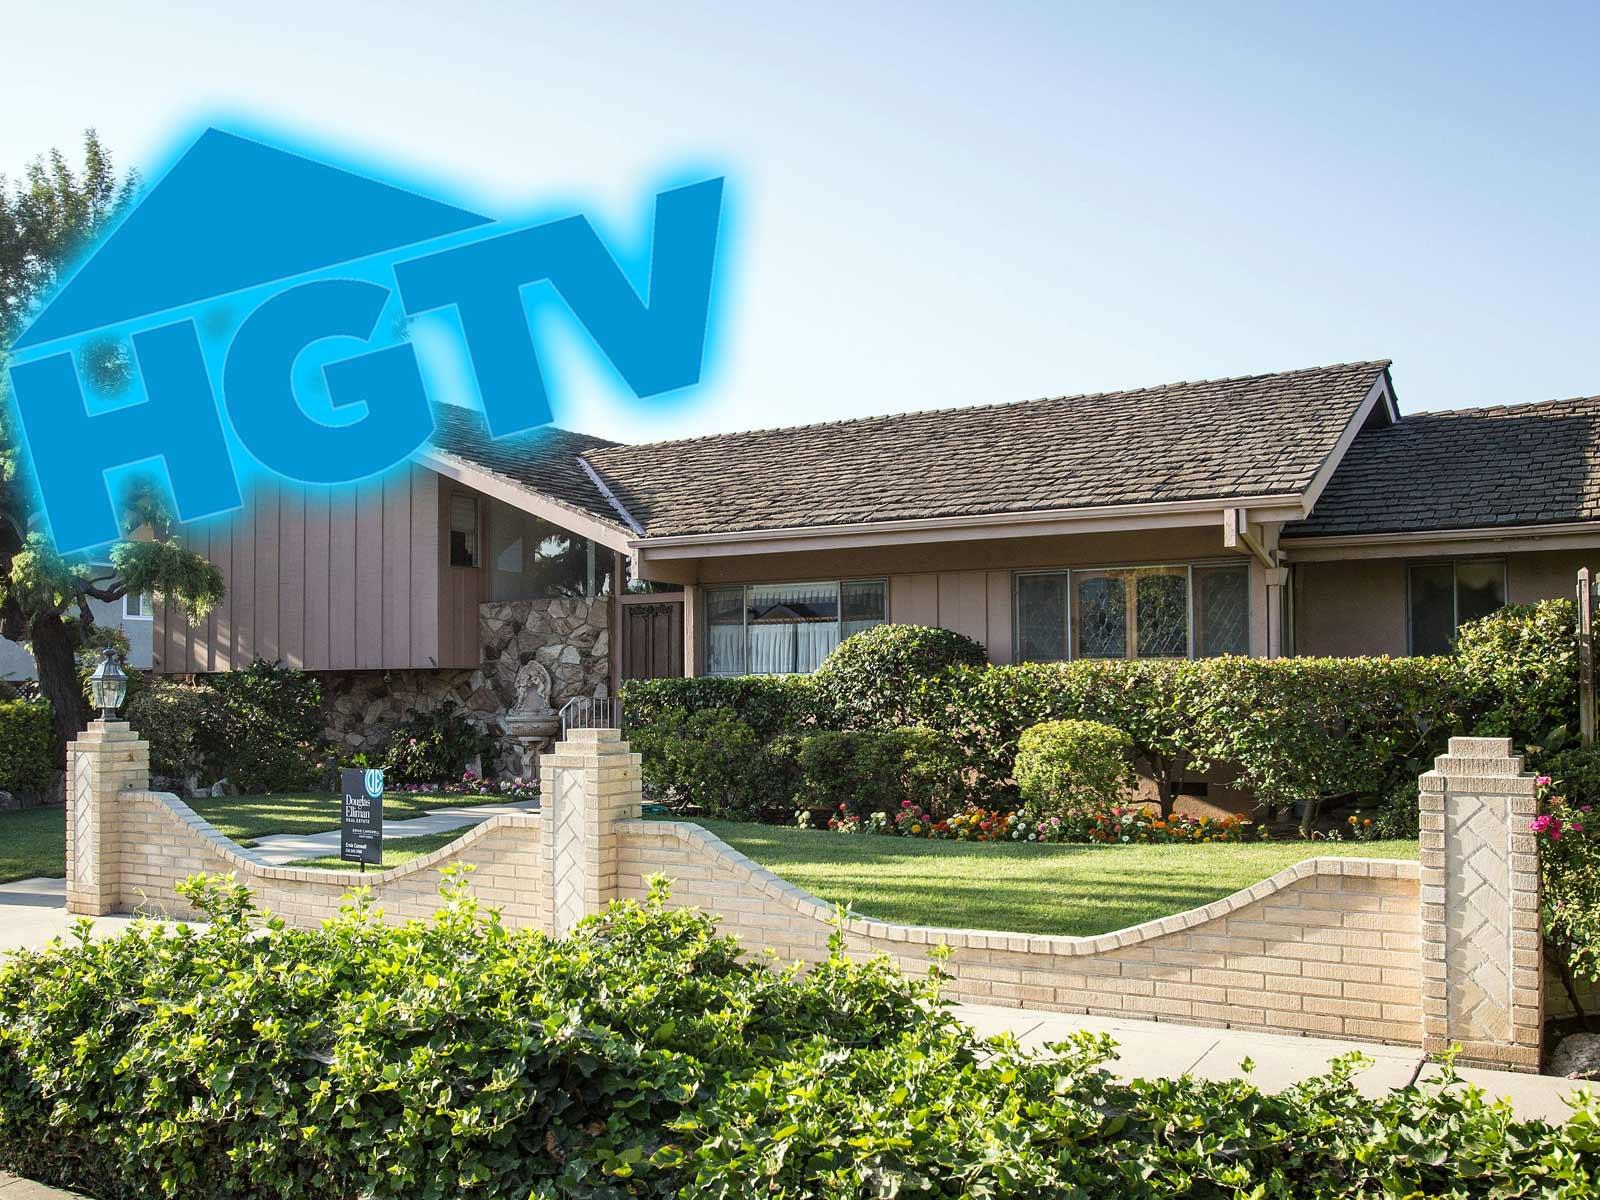 ‘The Brady Bunch’ House Set to Undergo Even More Changes During HGTV Remodel